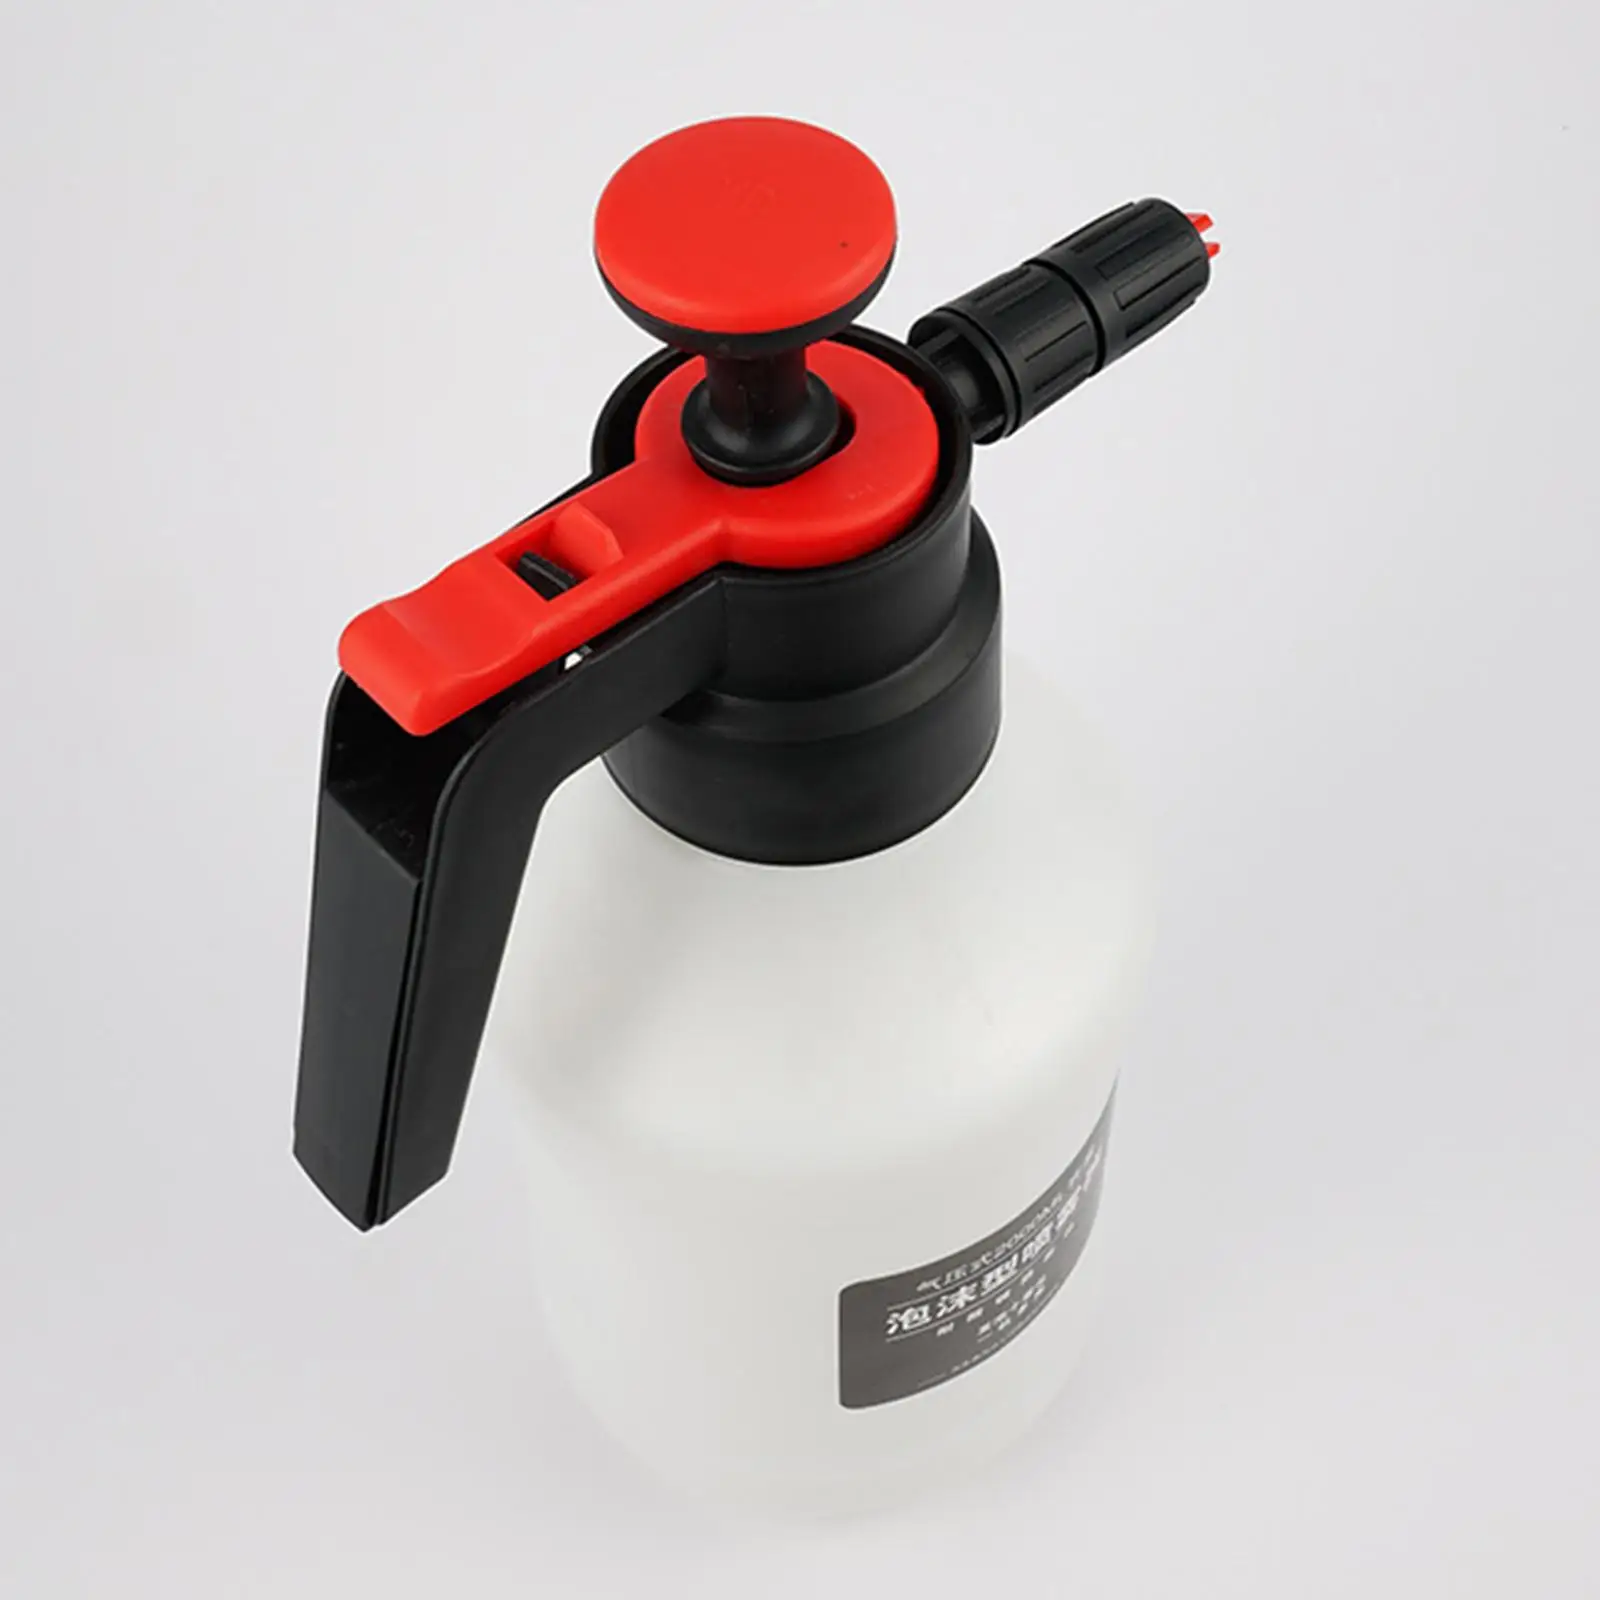 Hand Pump Pressure Sprayer, Foam Sprayer for Home, Lawn, Garden, Car Detailing and Home Window Cleaning, with 3 Spray Nozzles